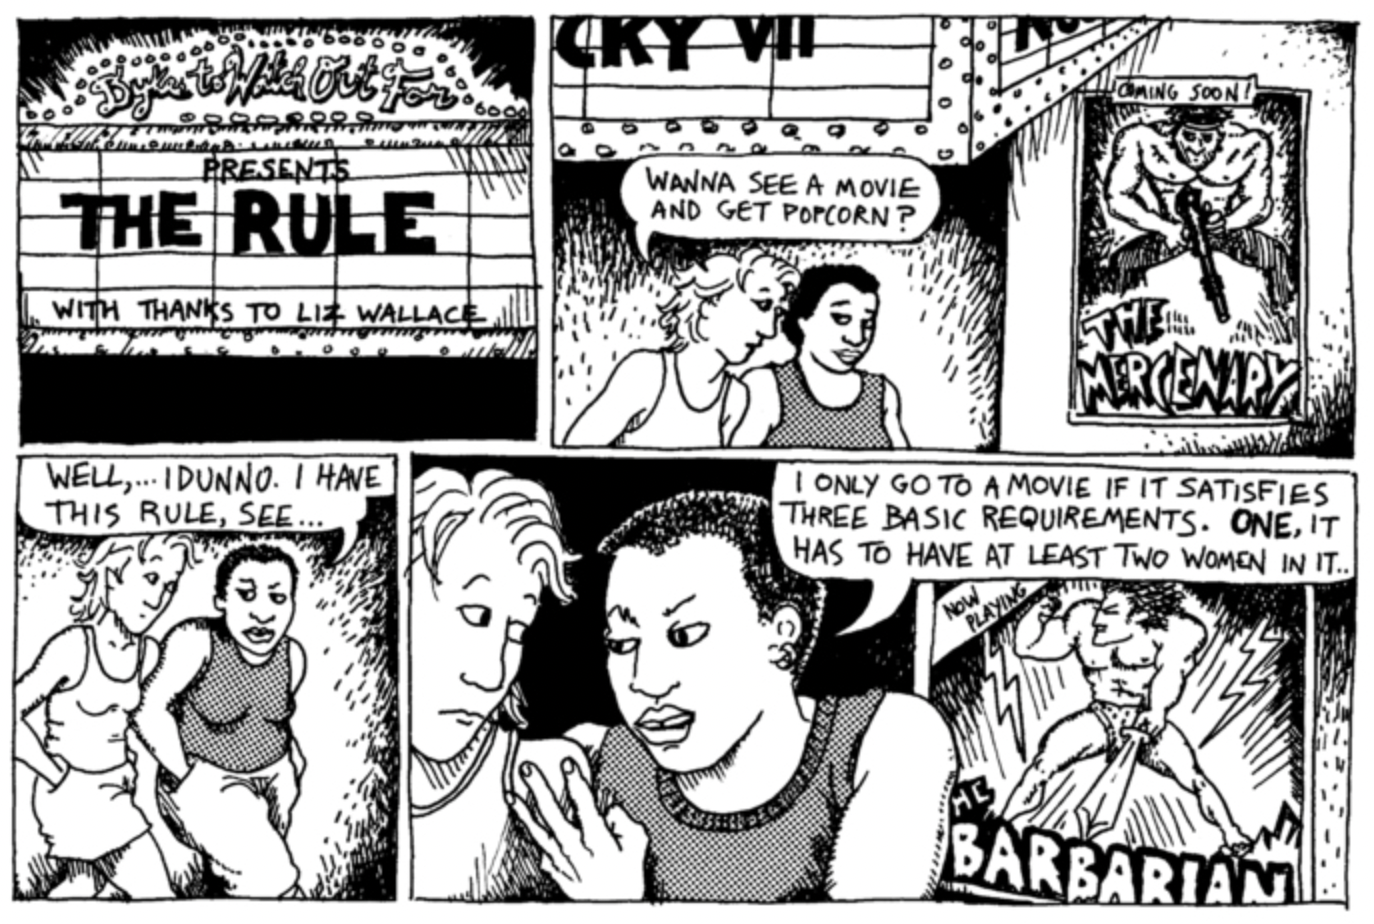 Comic panel of Alison Bechdel's Dykes to Watch Out For: "The Rule"